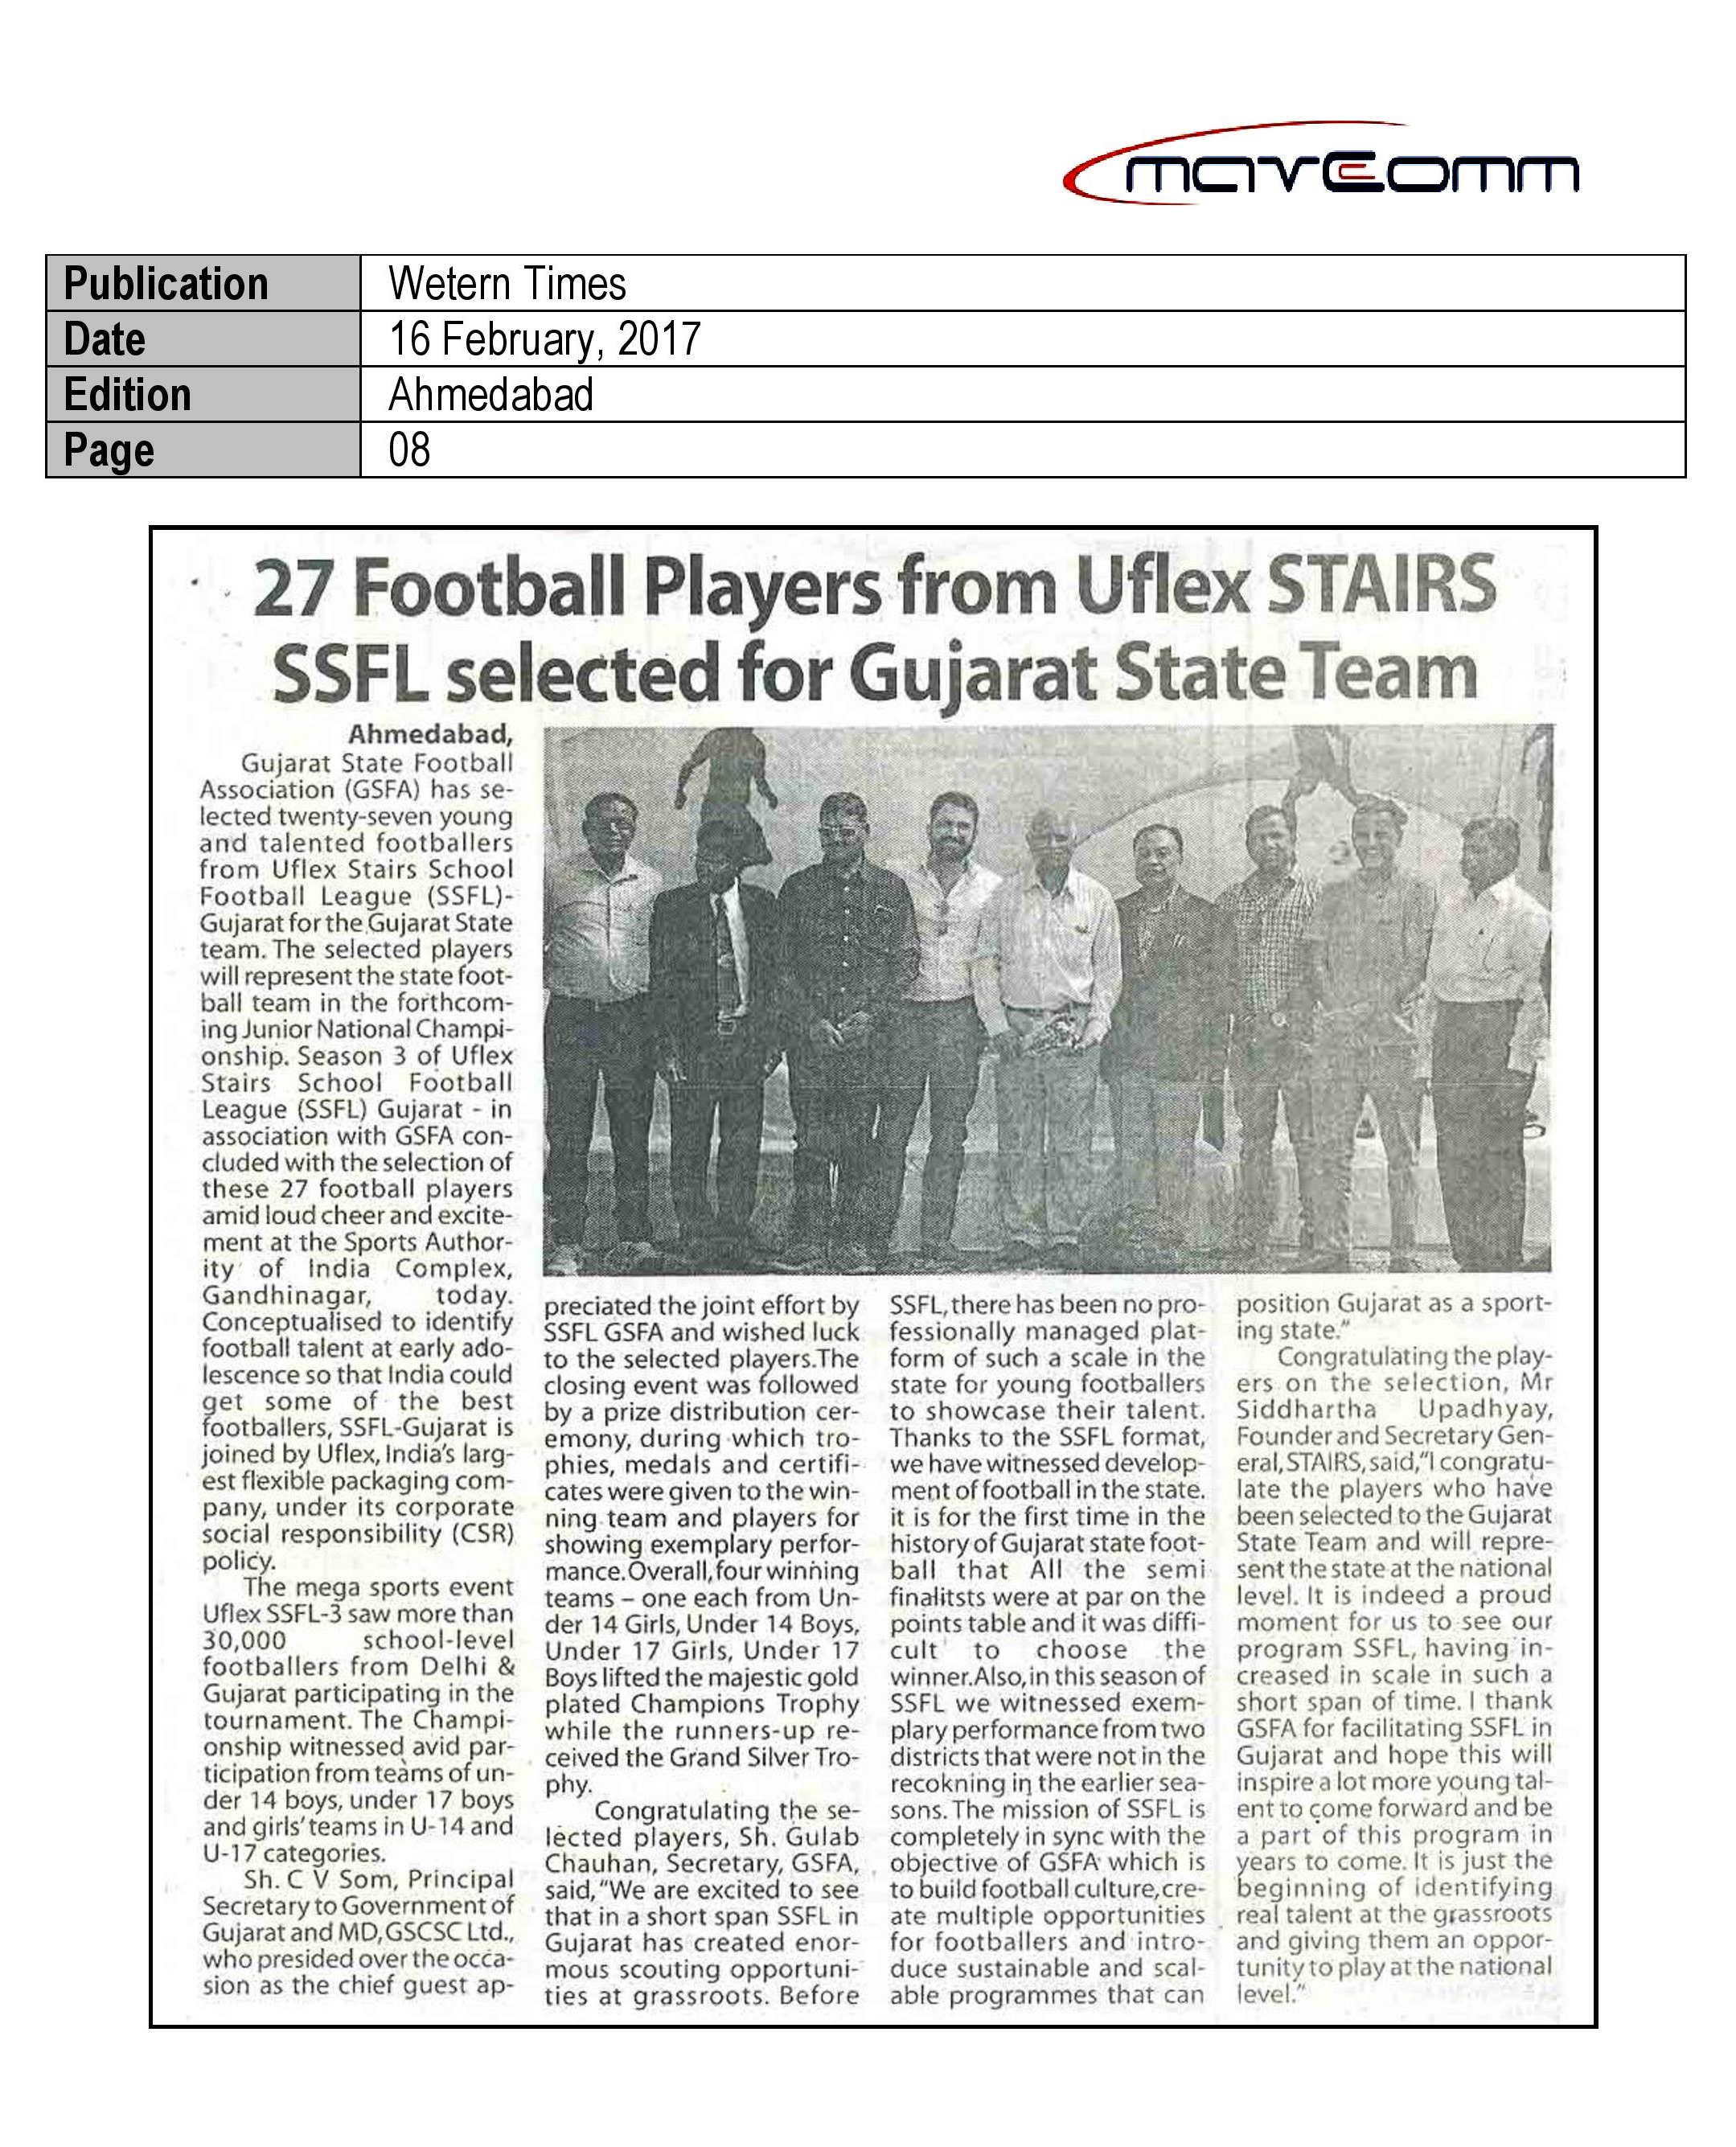 27 Football Players From Uflex Stairs SSFL Selected For Gujarat State Team